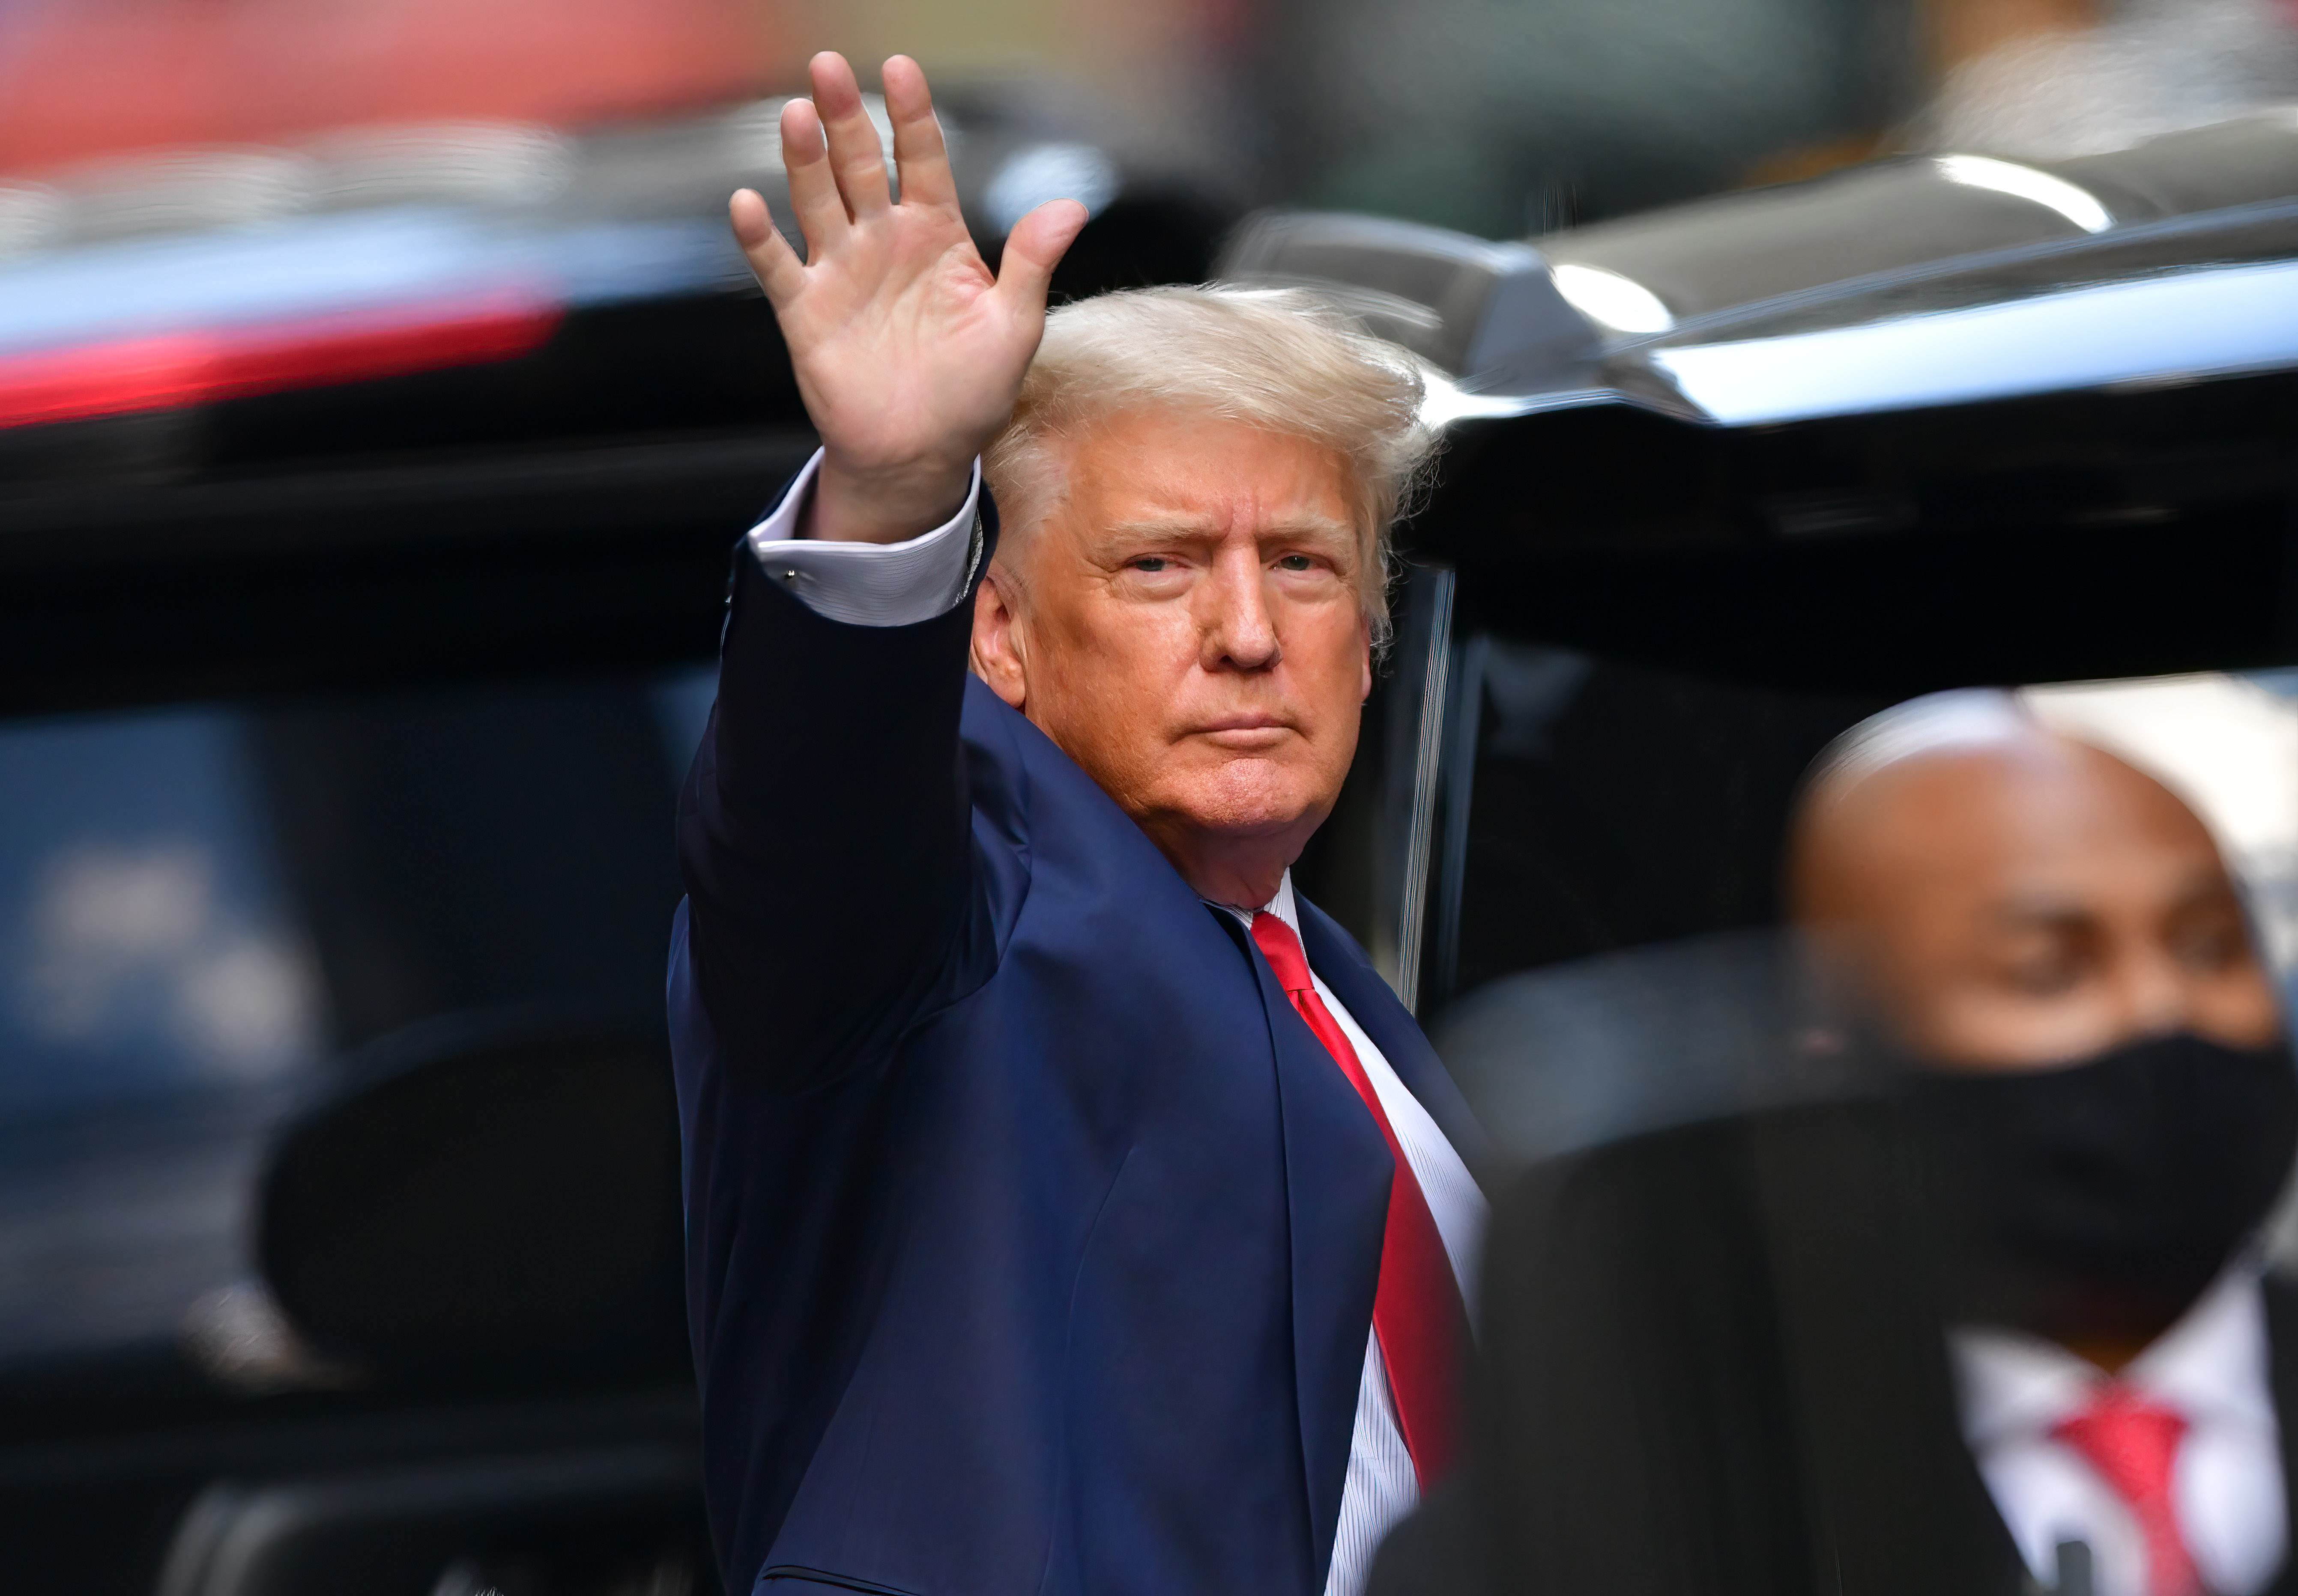 Former president Donald Trump waves as he heads toward his car after exiting Trump Tower in Manhattan on May 18, 2021, in New York City.